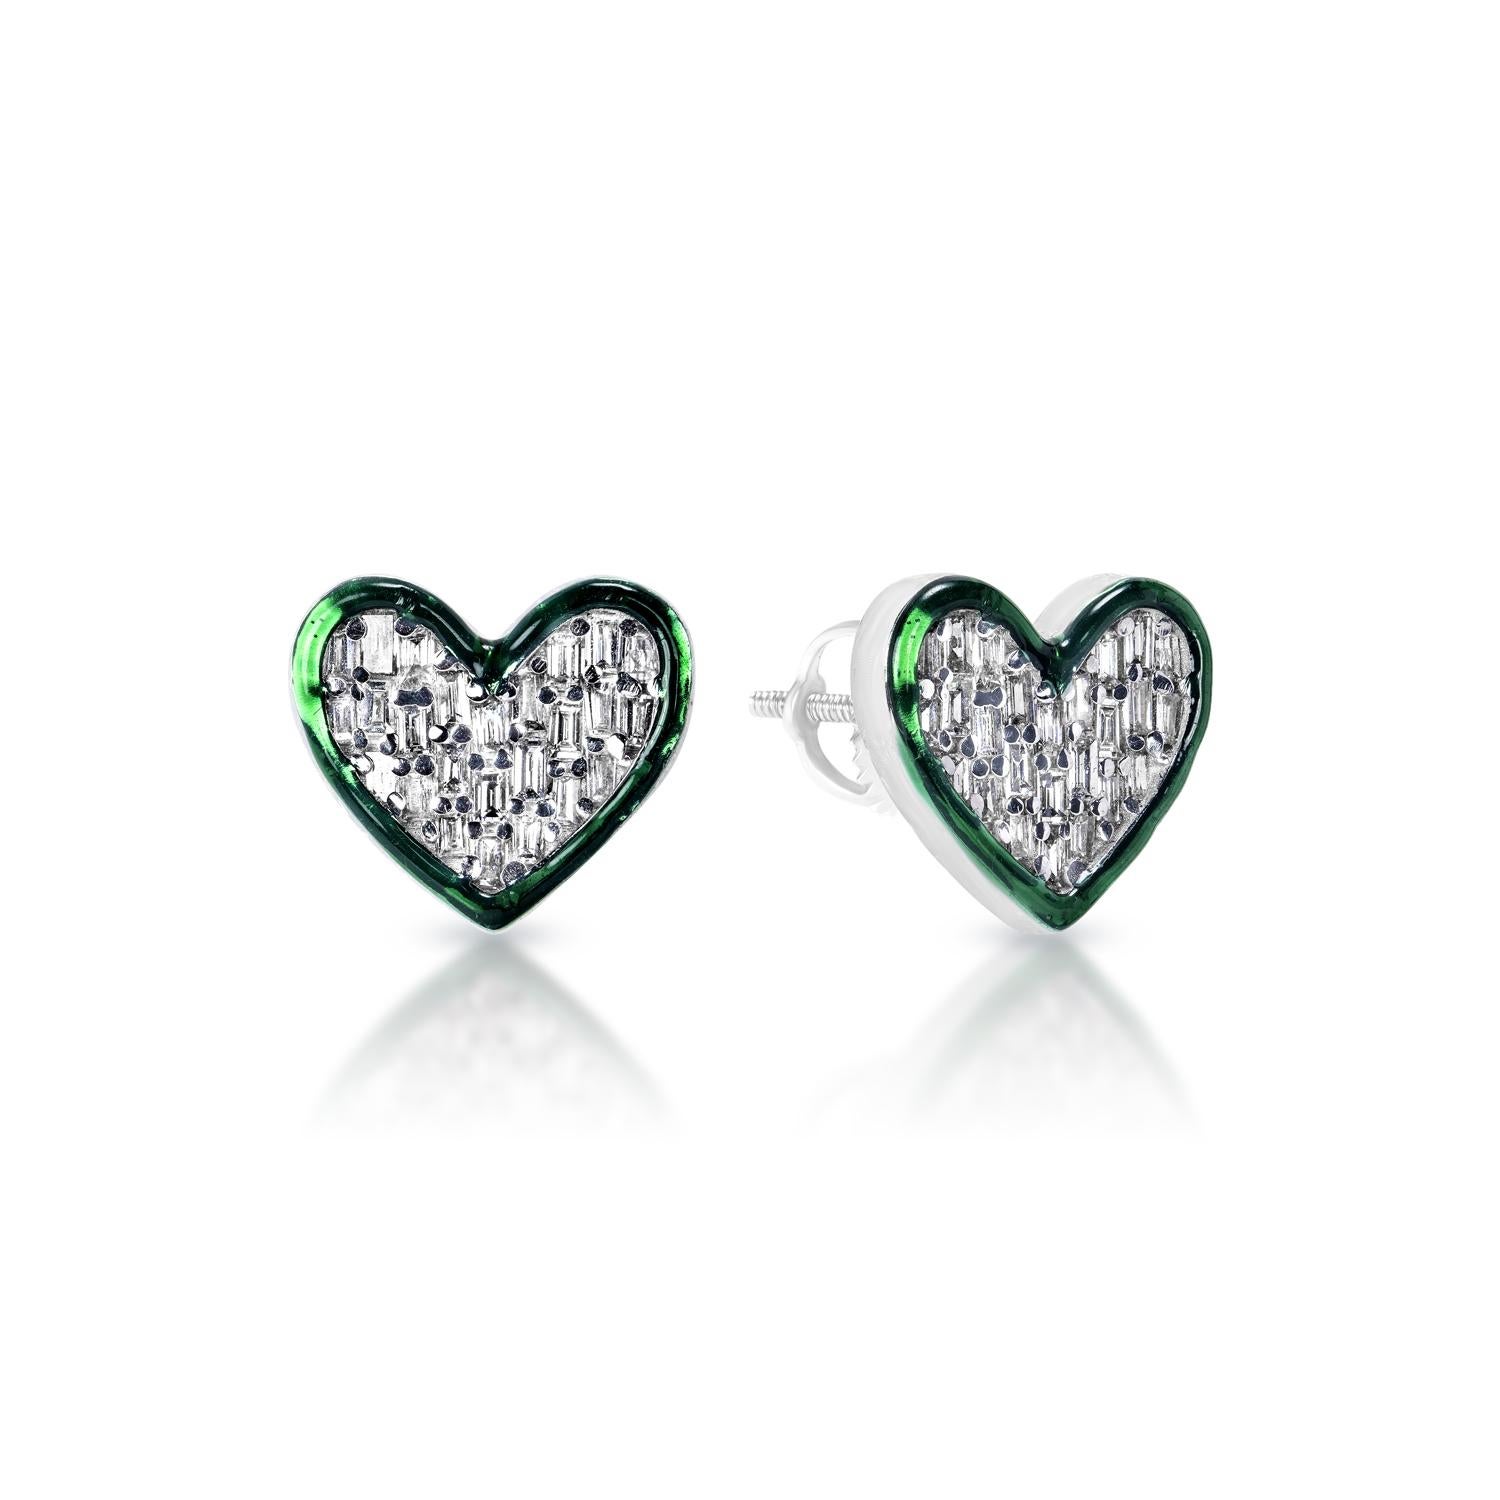 0.53 Carat Heart Baguette Cut Diamond Stud Earrings with Green Enamel Certified In New Condition For Sale In New York, NY